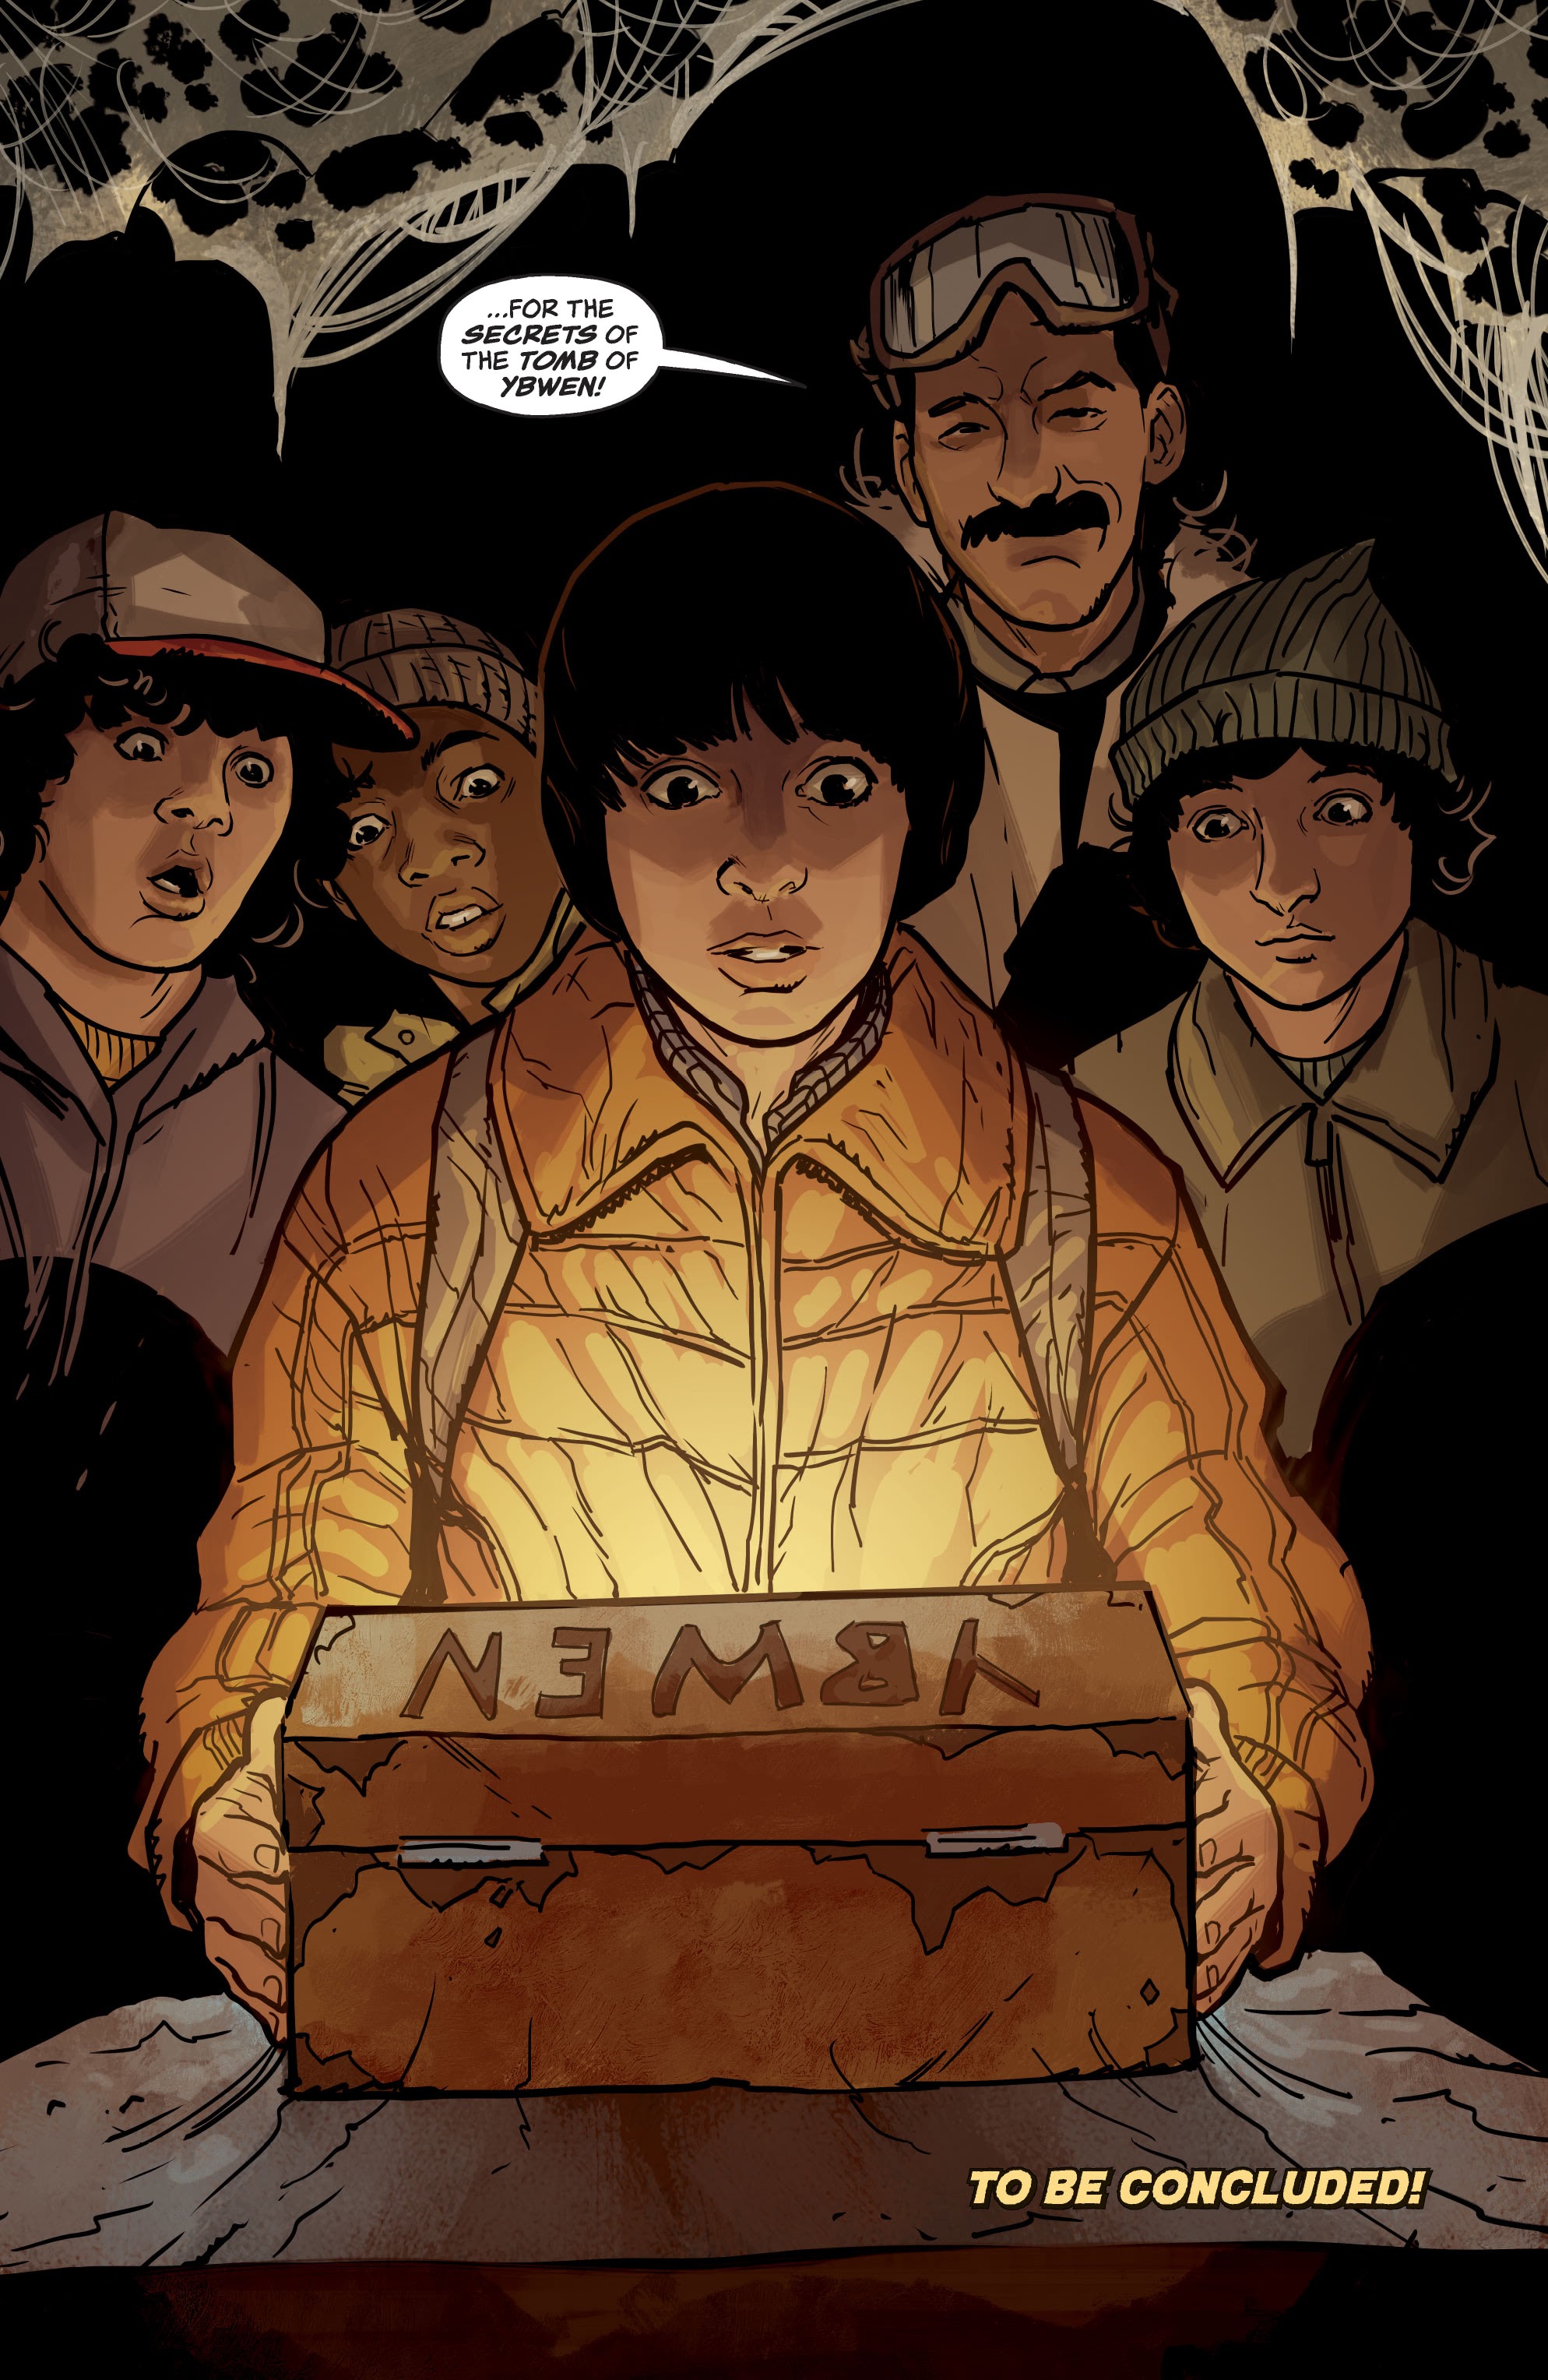 Read online Stranger Things: The Tomb of Ybwen comic -  Issue #3 - 22